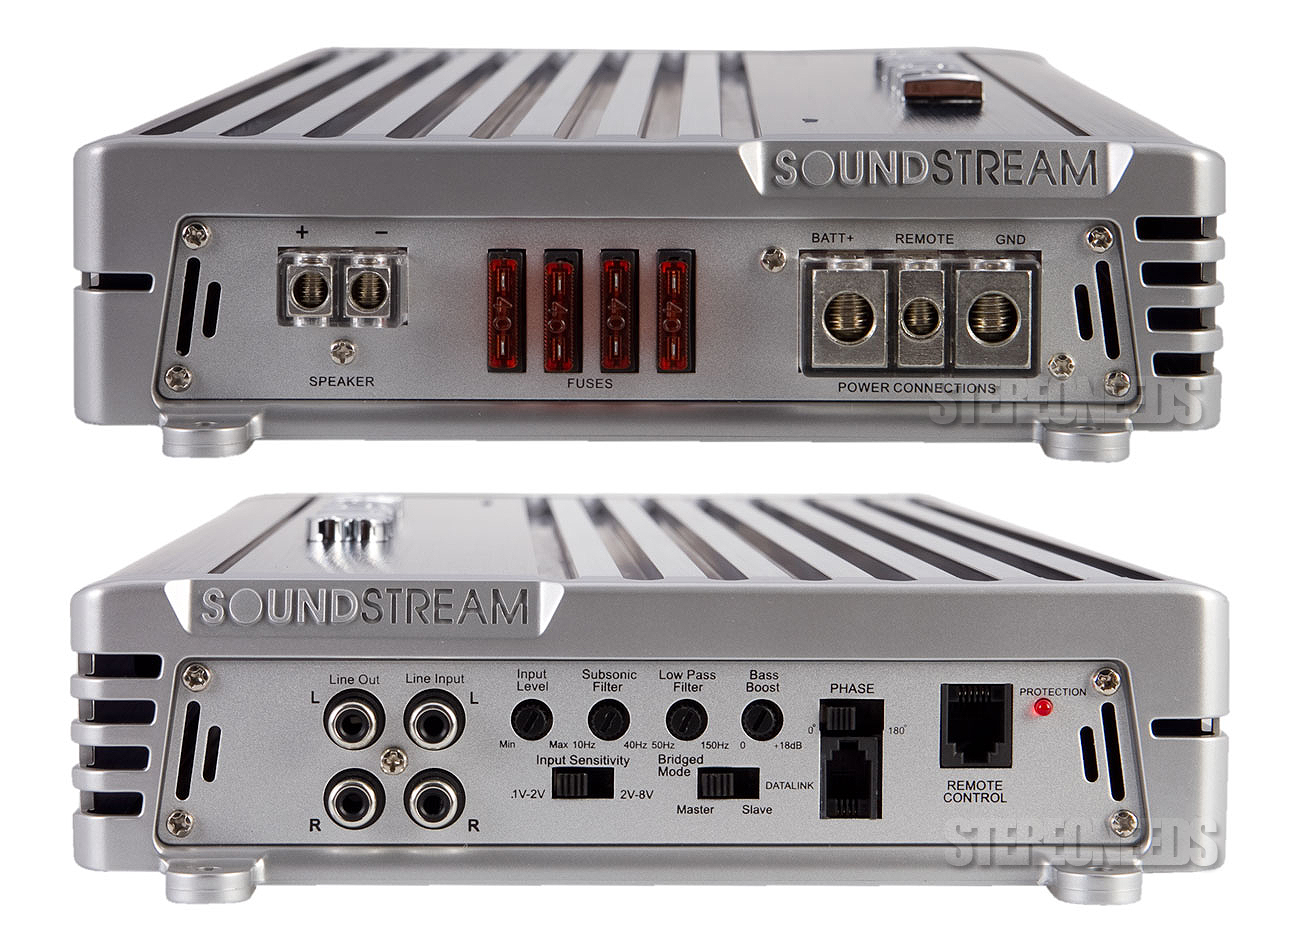 soundstream rubicon amplifier images